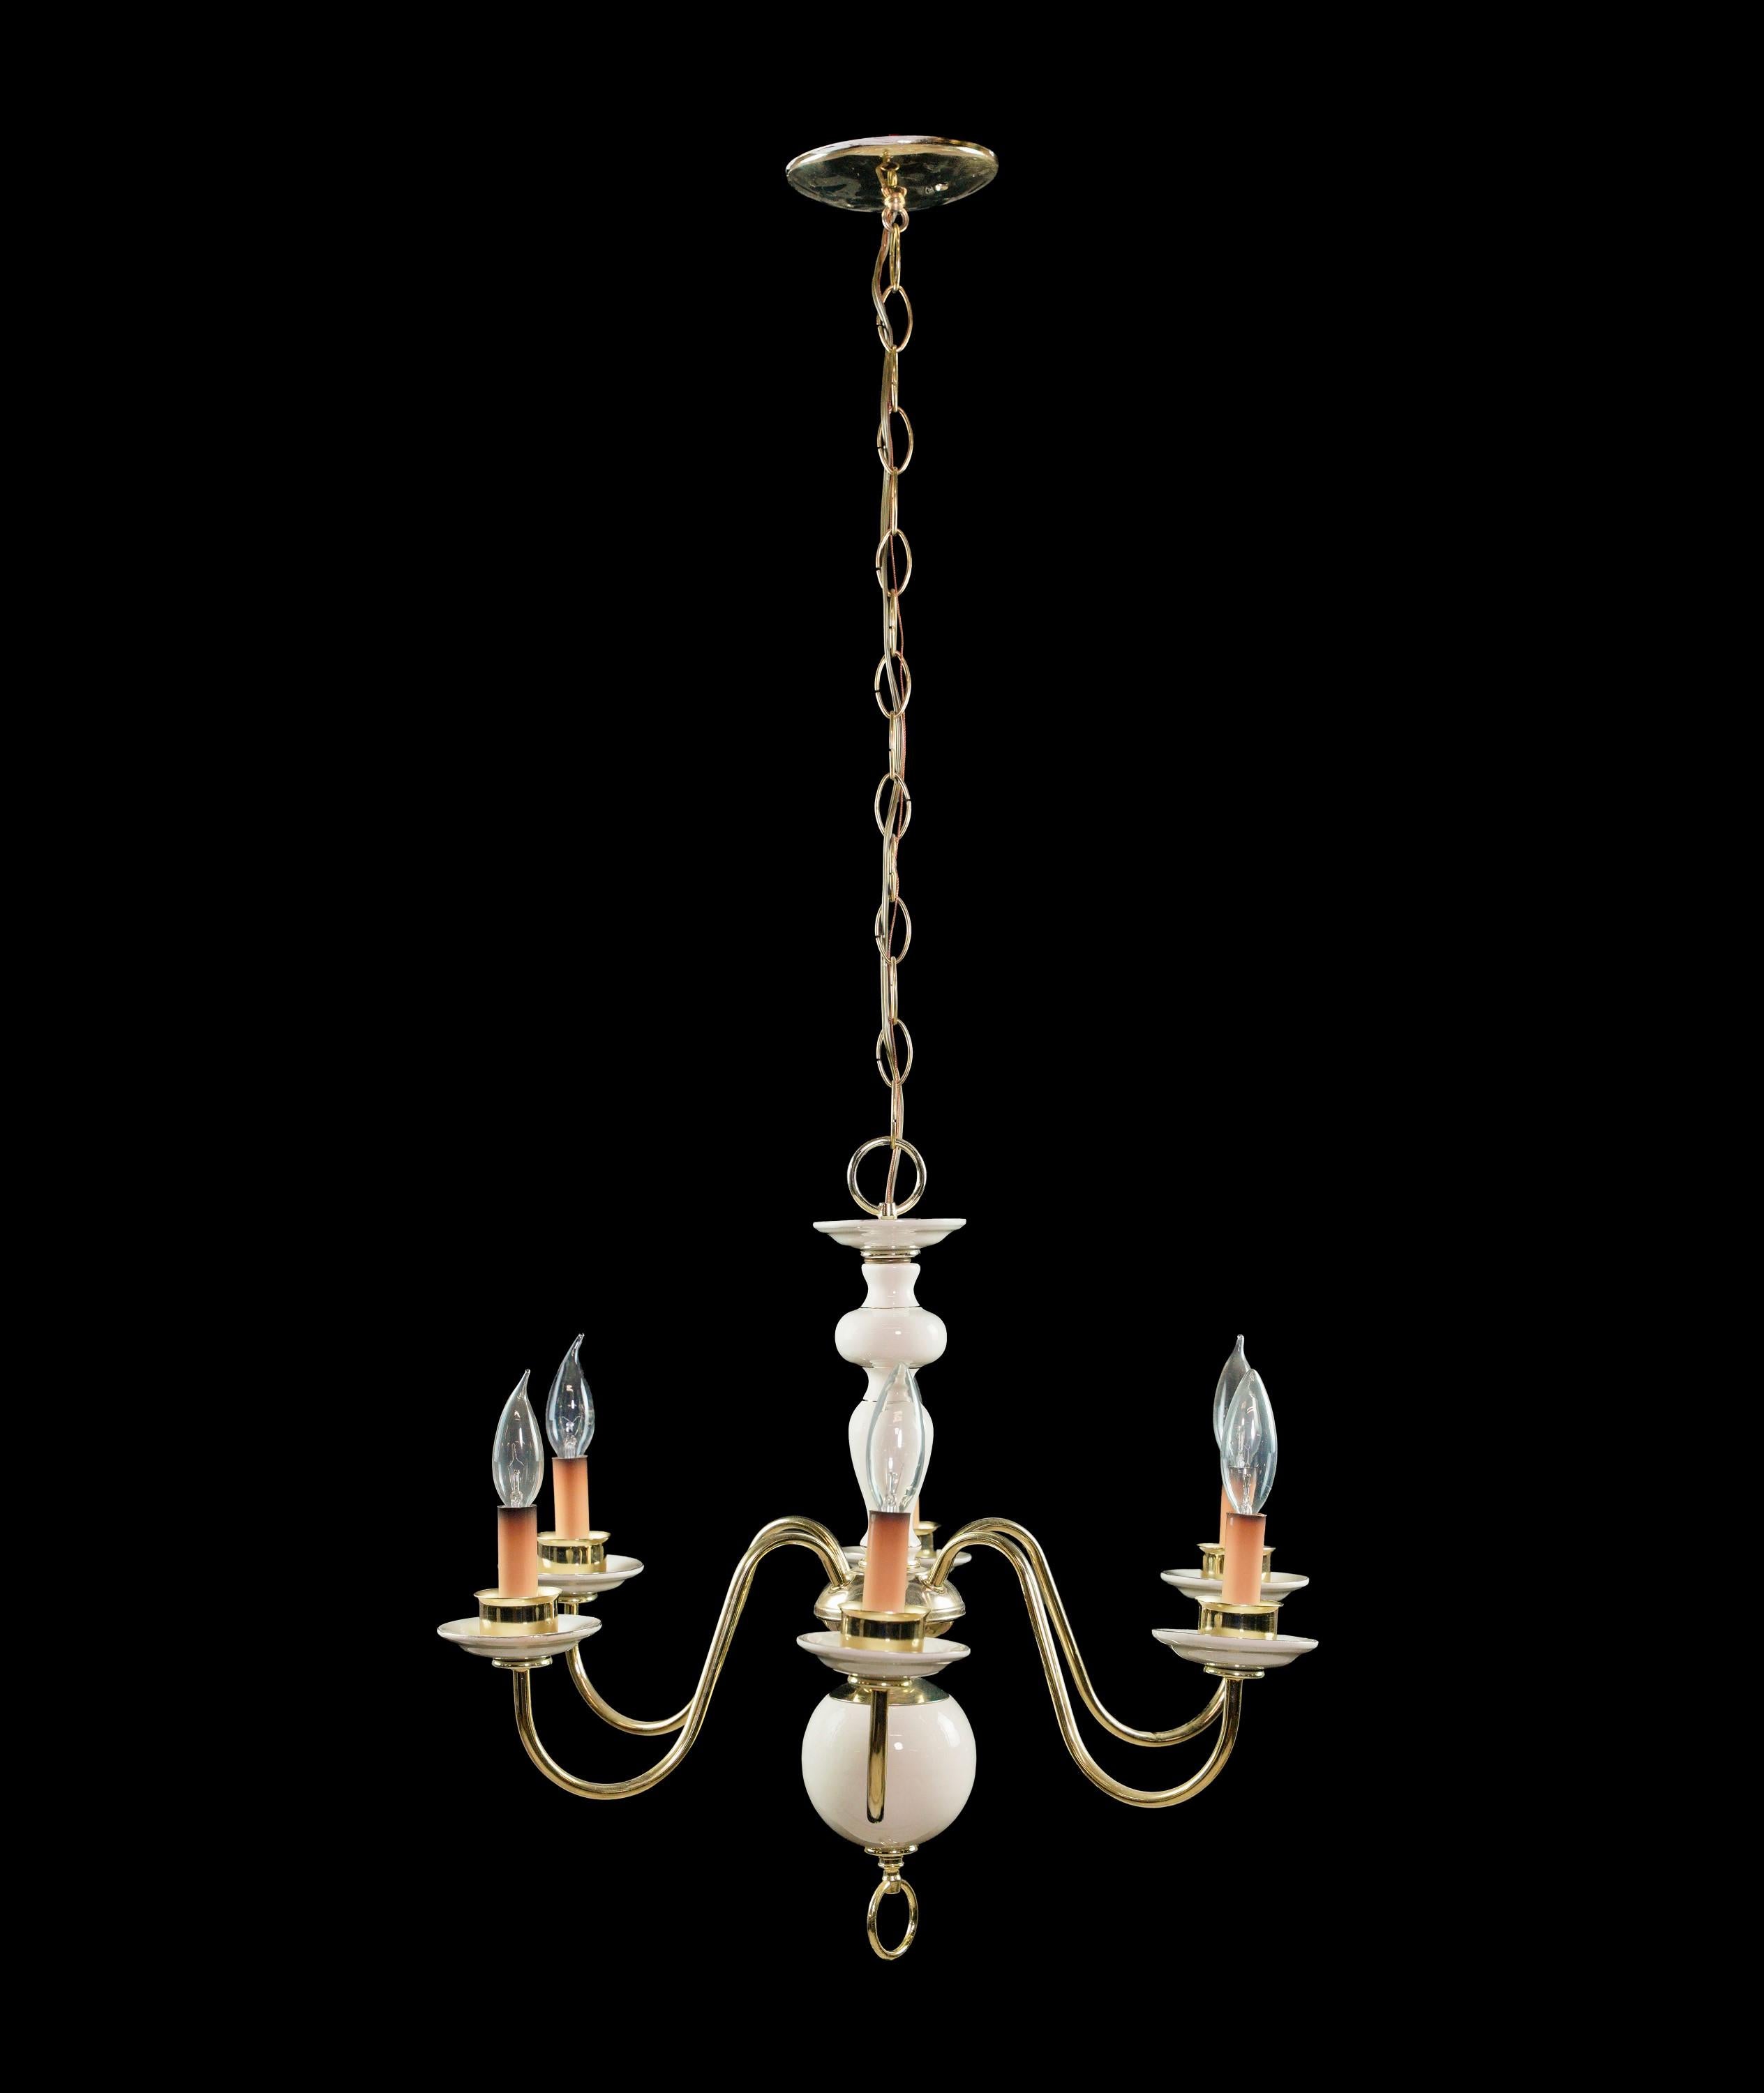 White and gold ceramic six arm chandelier with a polished brass plated steel frame and pinkish colored candelabra sockets. Cleaned and restored. There are some imperfections in the porcelain, but this is in overall good condition. Please note, this